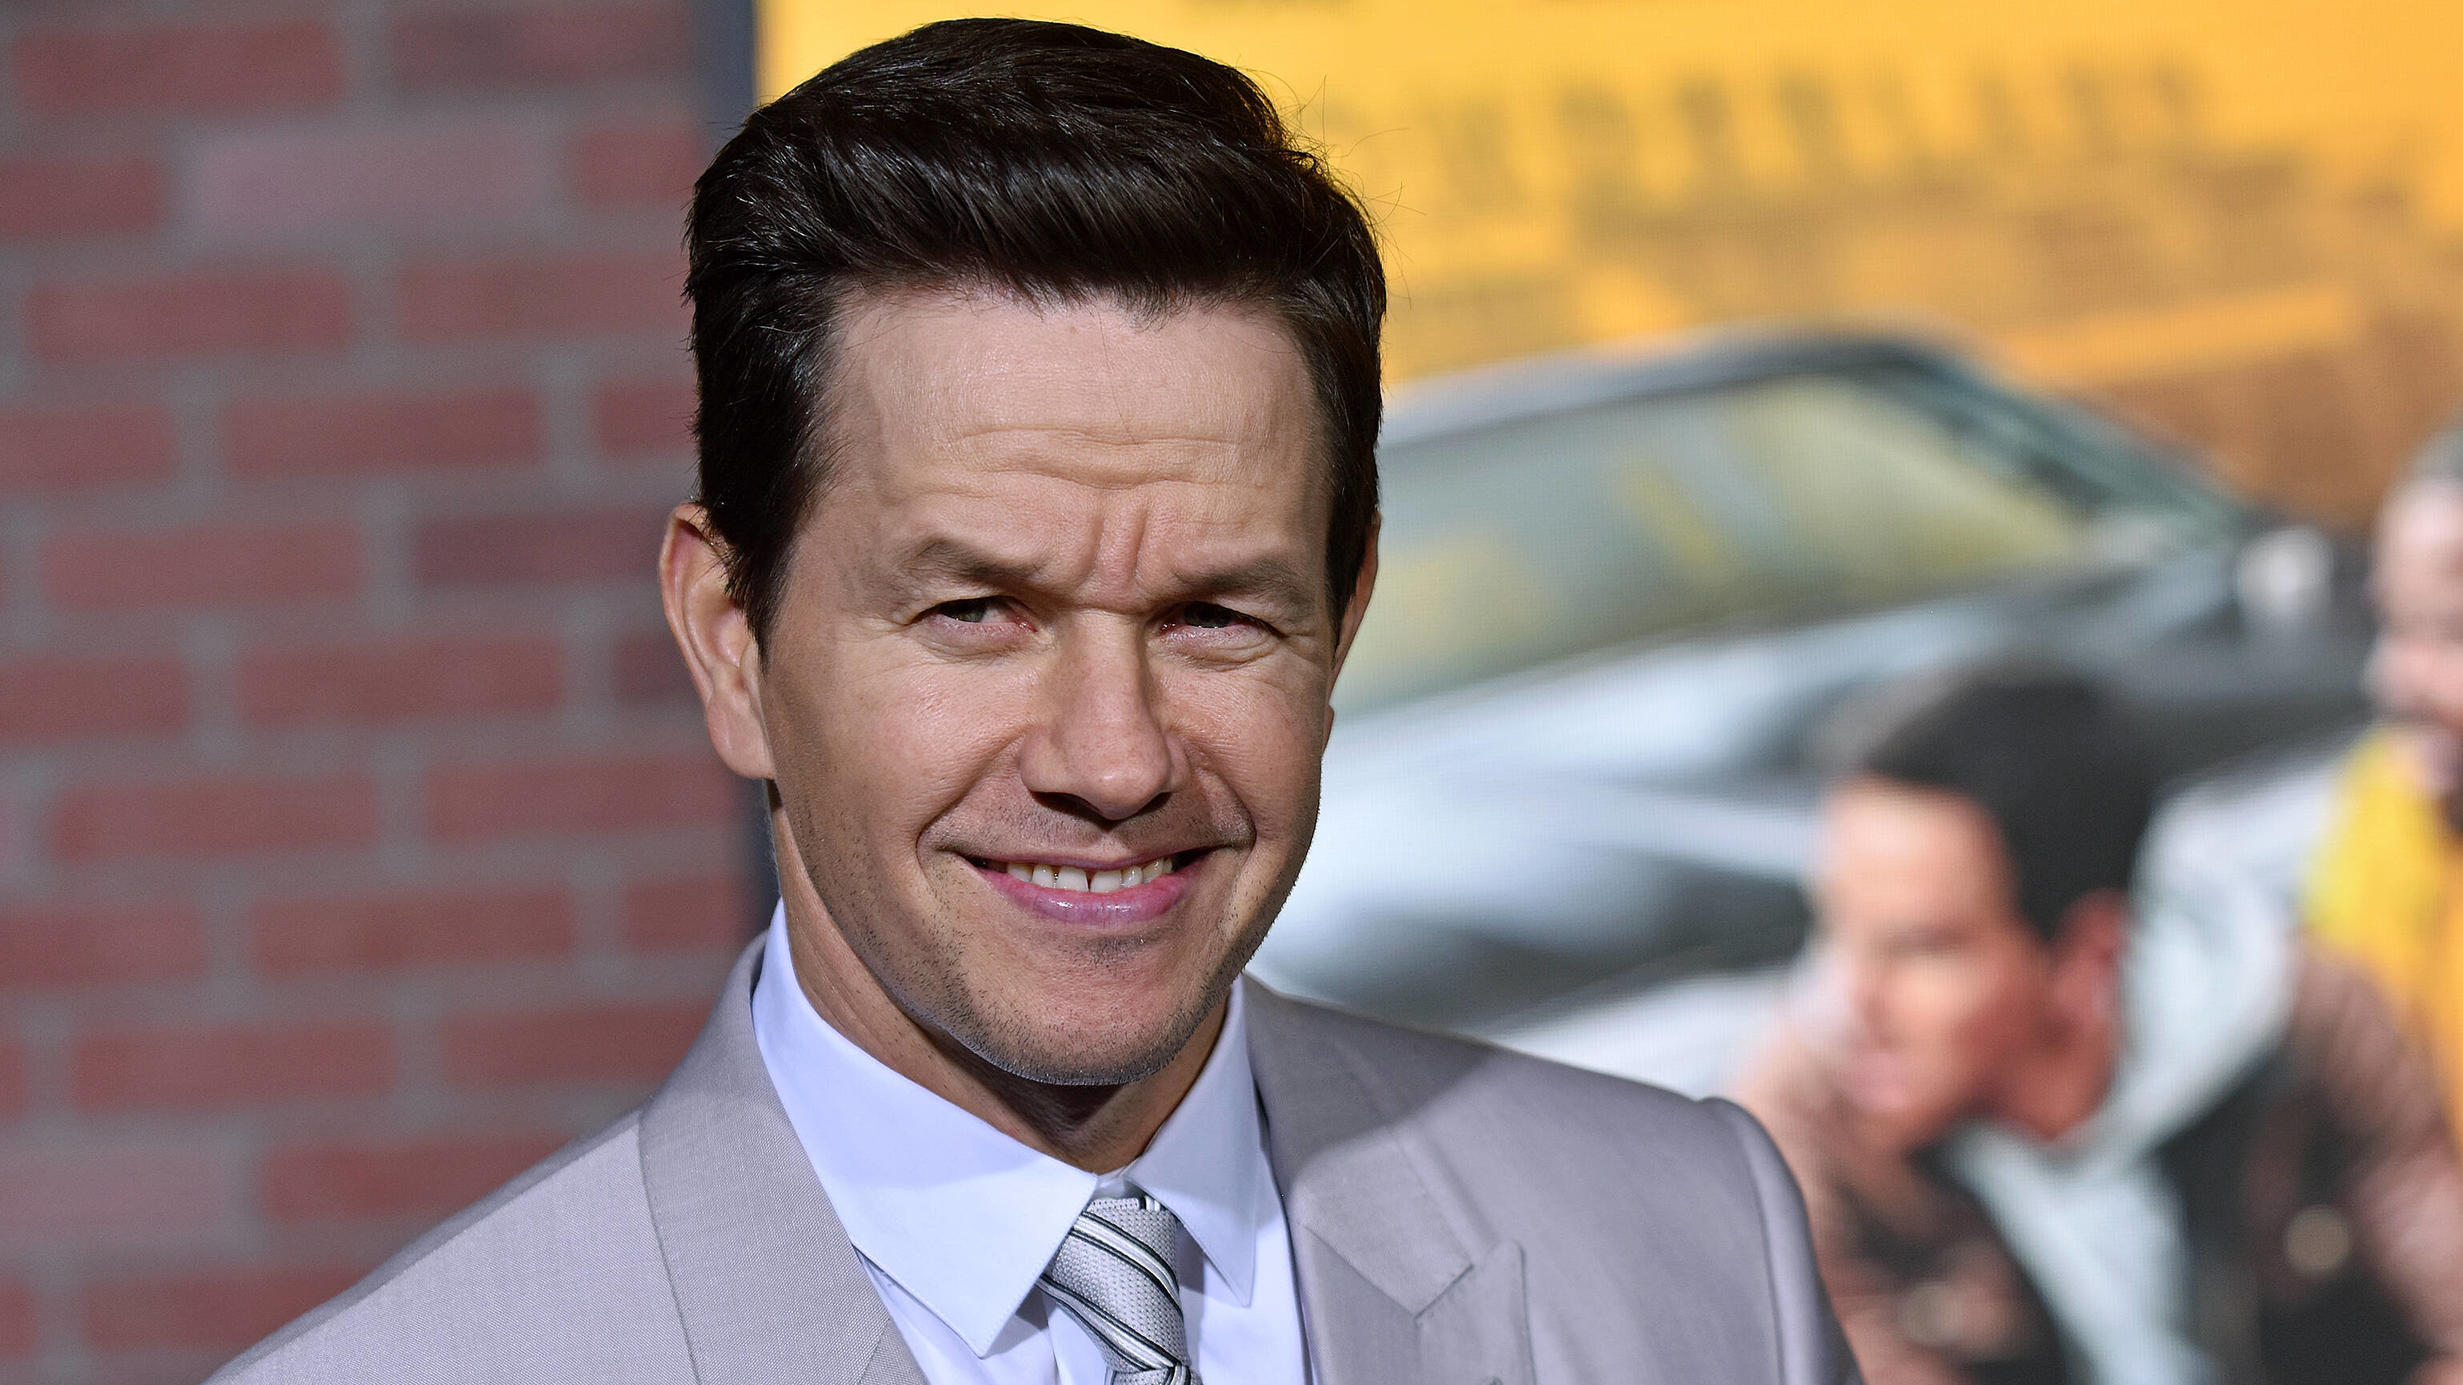  Mark Wahlberg arrives for the world premiere screening of Spenser Confidential at the Regency Village Theatre in Los Angeles, California on Thursday, February 27, 2020. PUBLICATIONxINxGERxSUIxAUTxHUNxONLY LAP20200227802 CHRISxCHEW